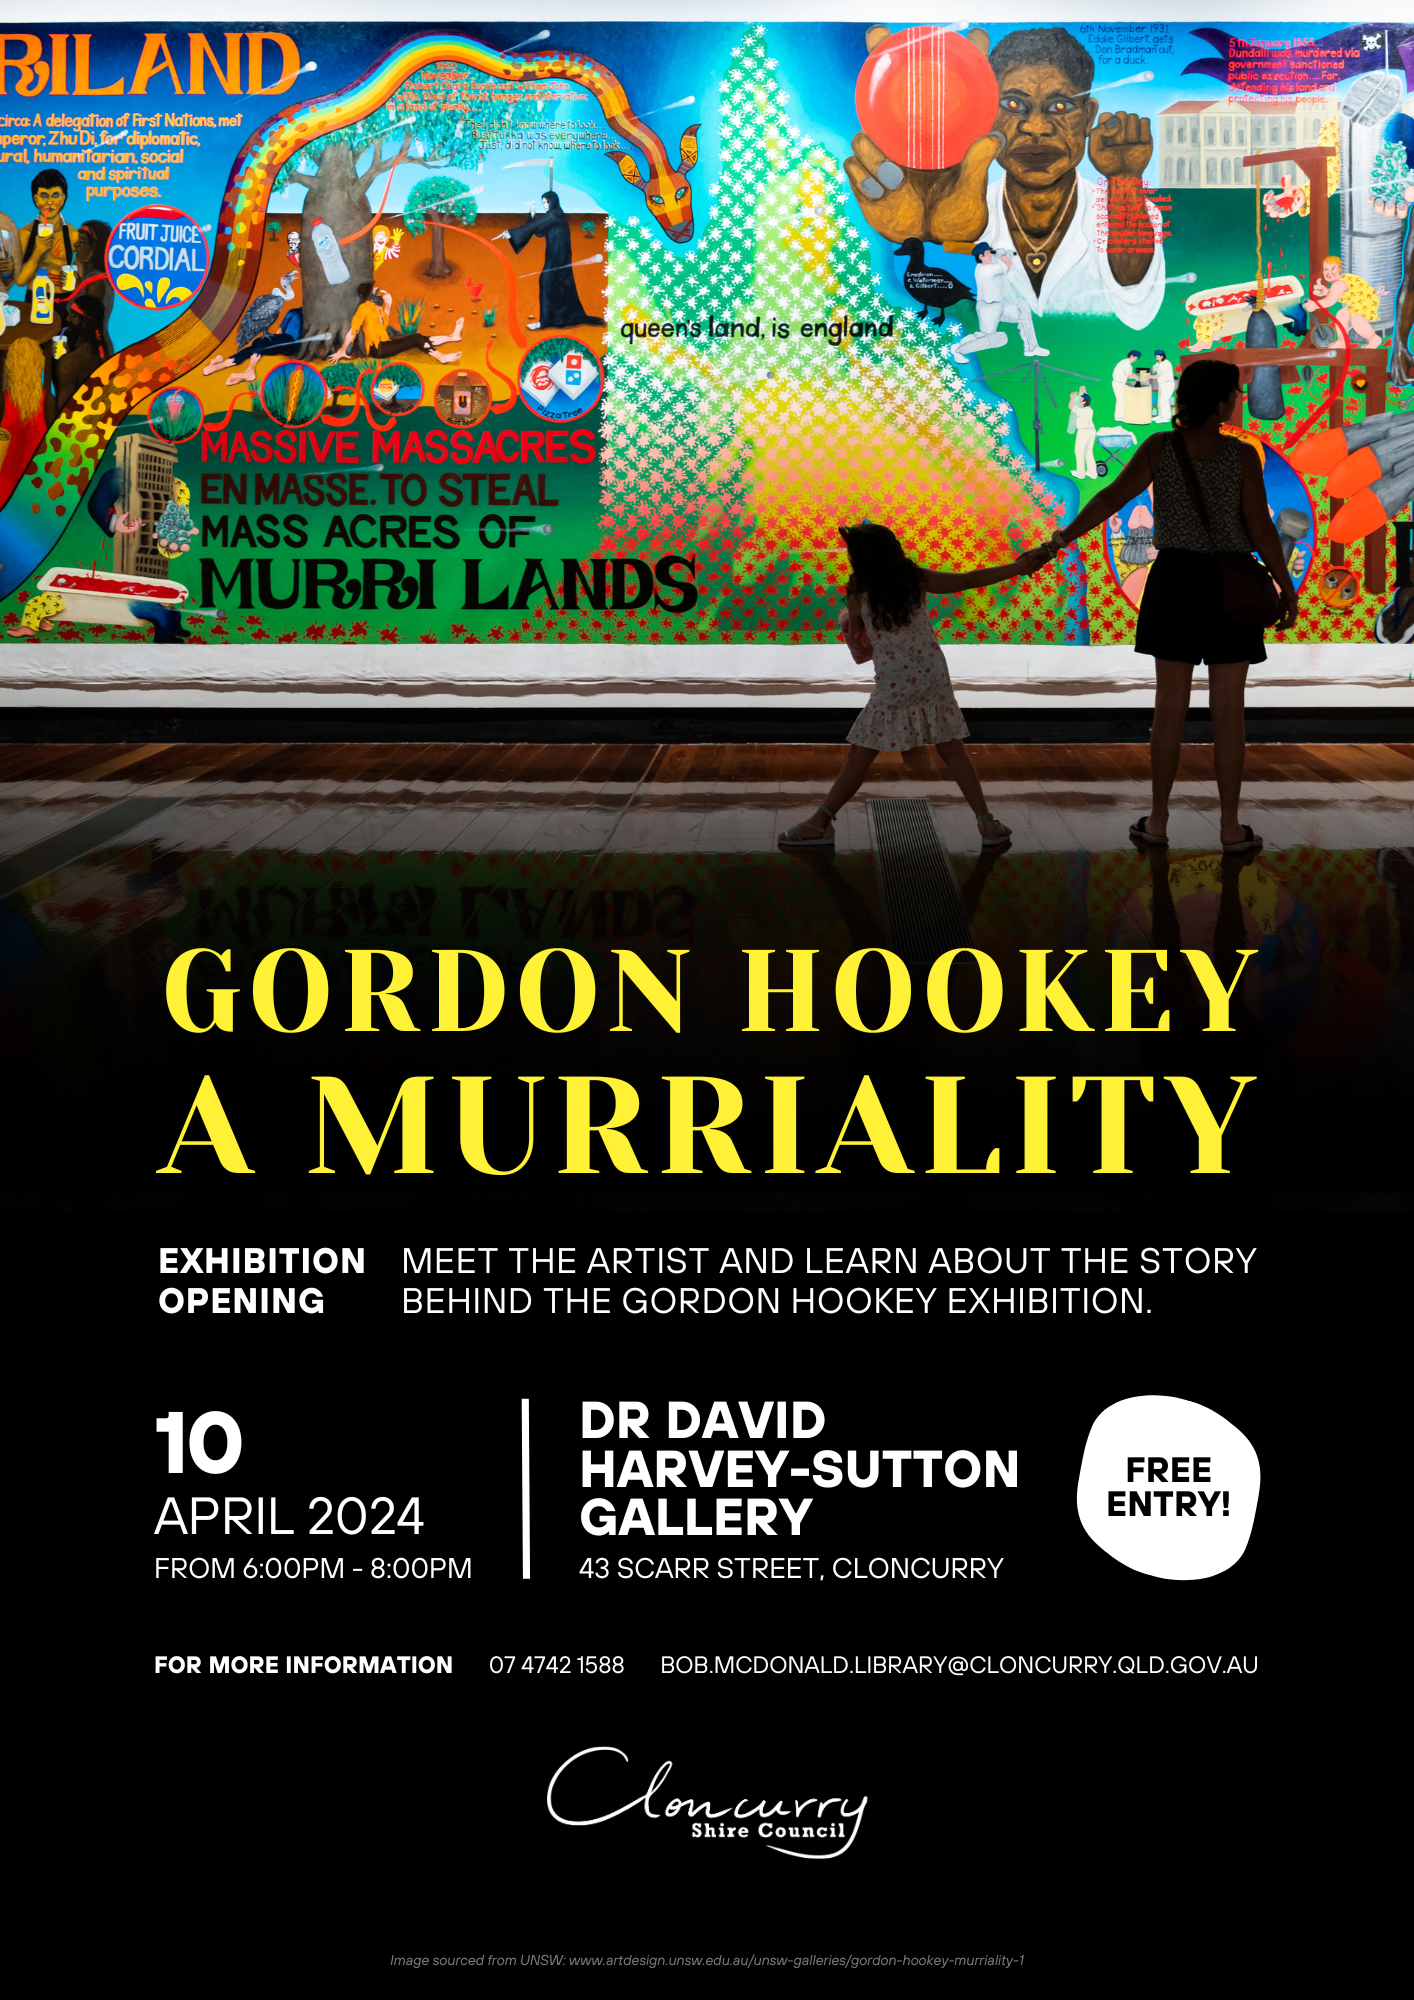 Gordon Hookey " A Murriality" Exhibition Opening 10 April 2024